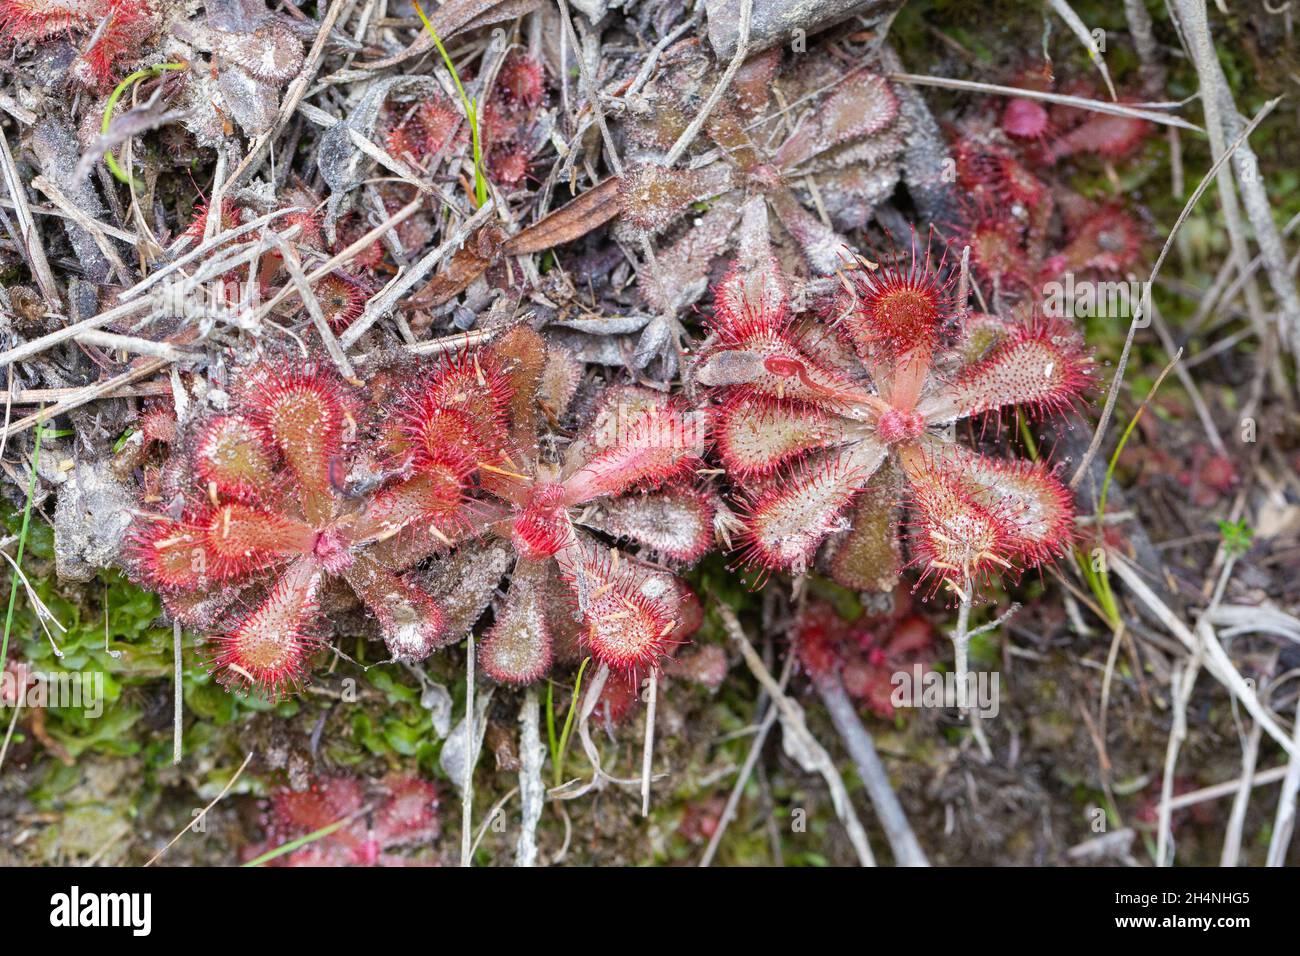 Close-up of three rosettes of the carnivorous plant Drosera venusta found in nature close to George in the Western Cape of South Africa Stock Photo